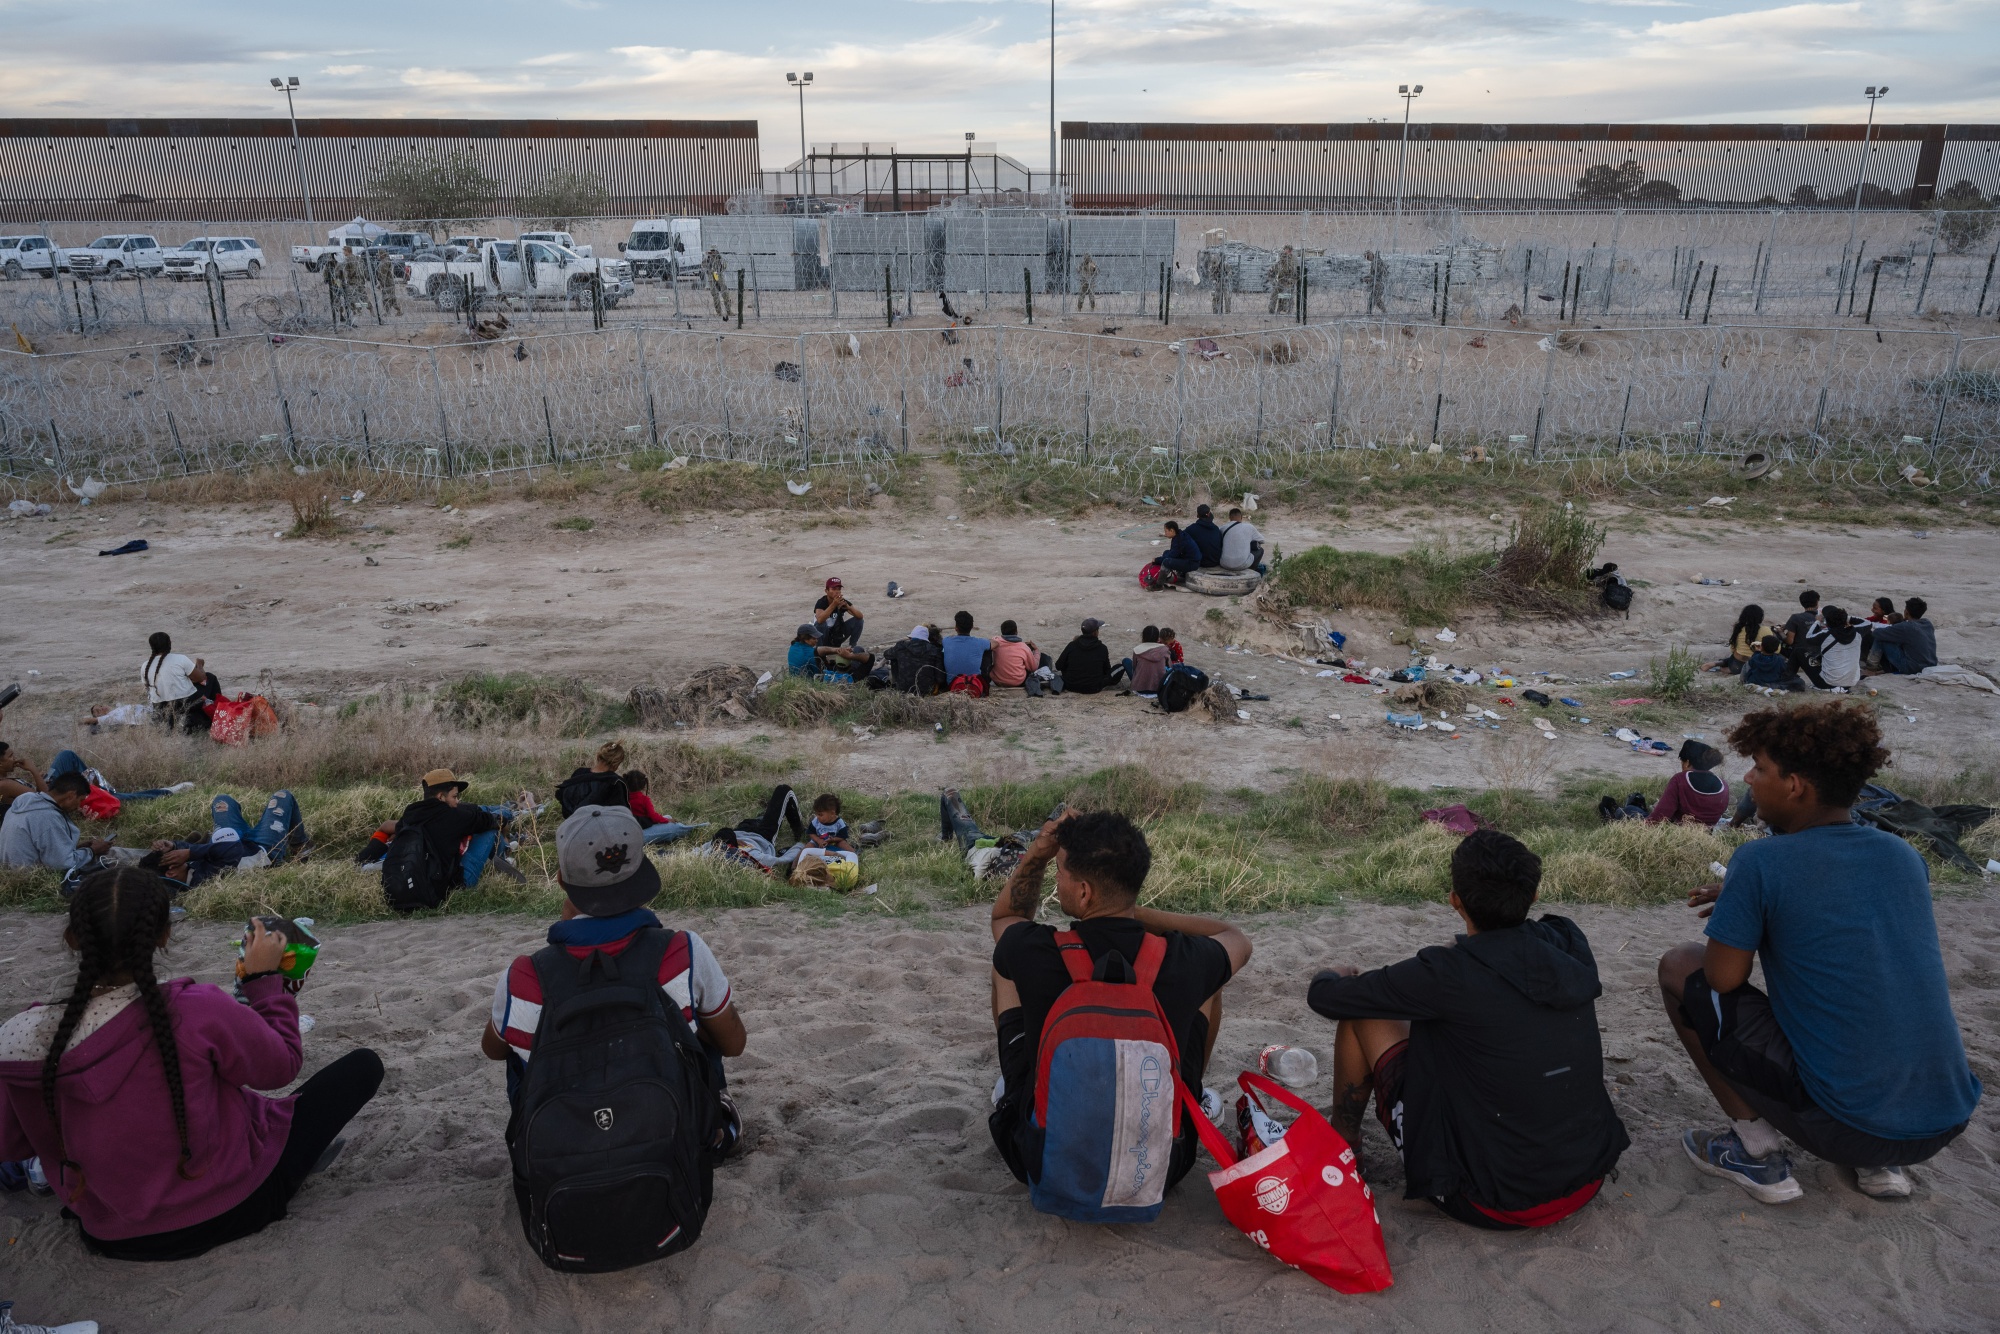 Migrants&nbsp;on the bank of the dry river bed of the Rio Grande at the US-Mexico border in Ciudad Juarez.